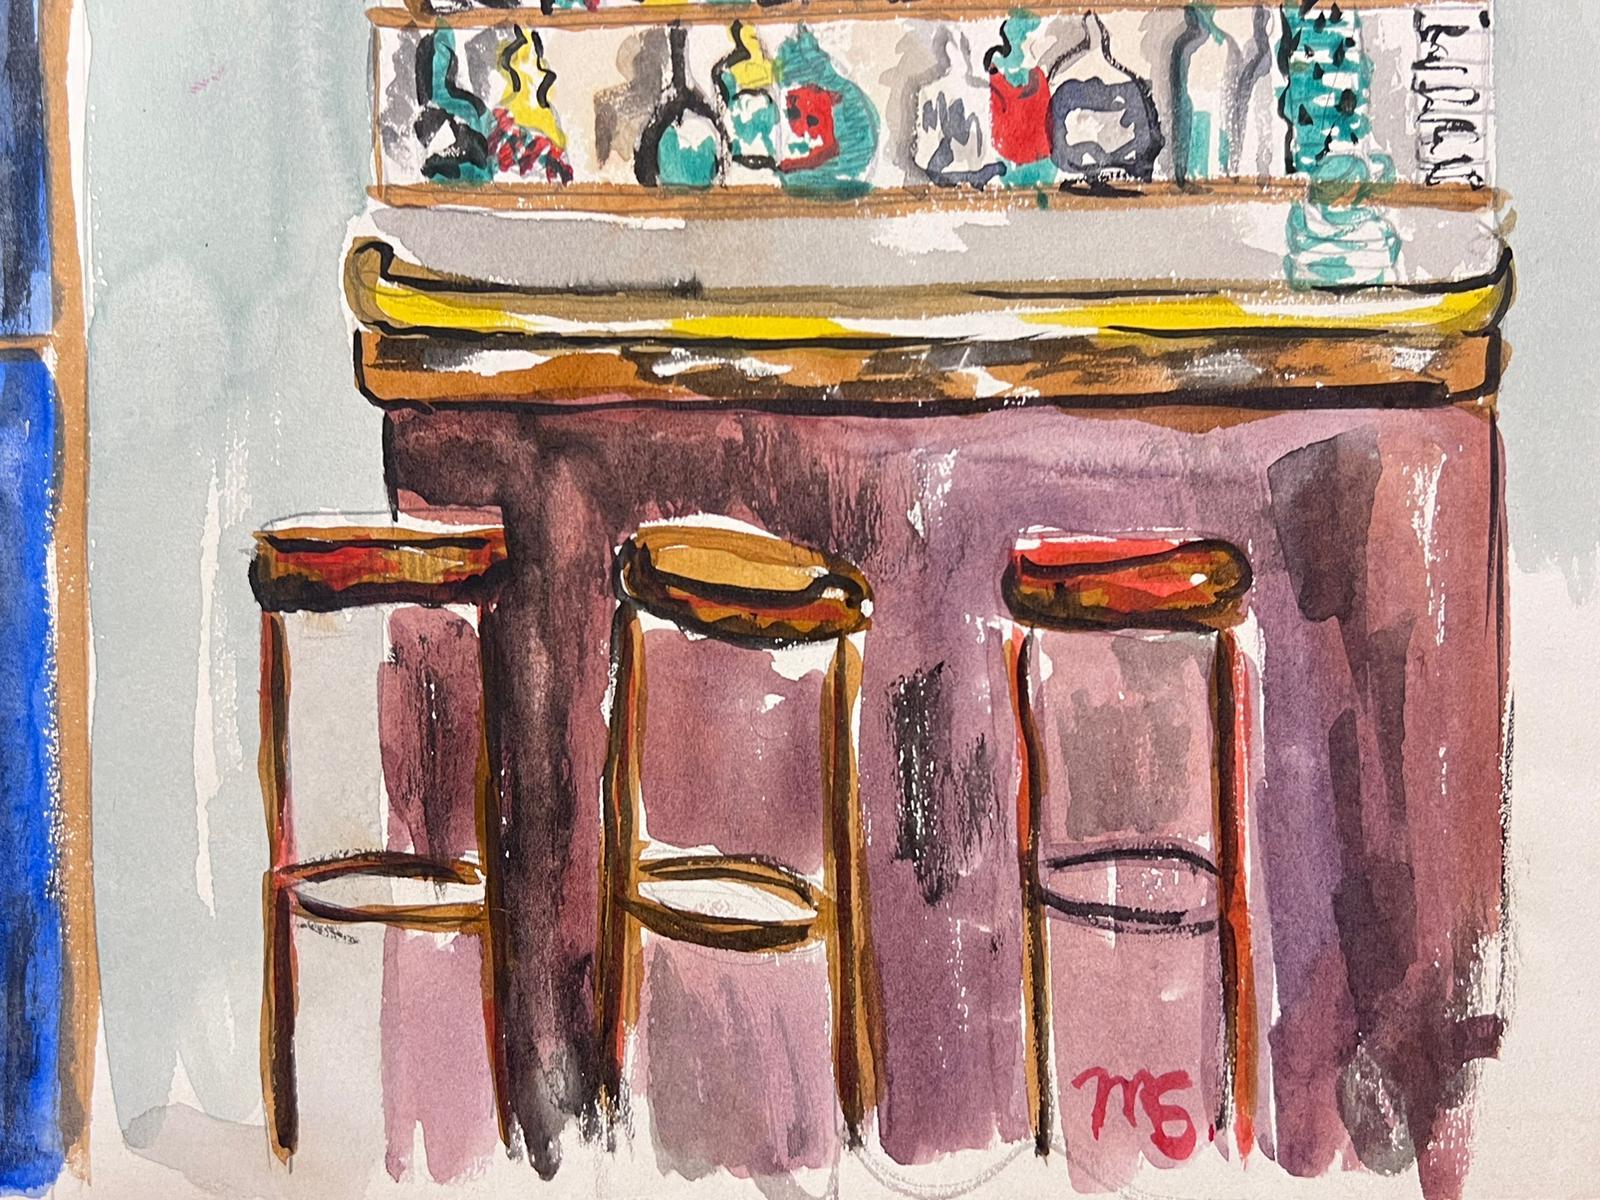 French Bar
original watercolour painting on artist paper
signed by Marjorie Schiele (1913-2008) *see notes below
piece of paper is 9.5 x 12.5 inches
In good condition
provenance: from a private collection in Paris

Schiele,  was Cincinnati-born and